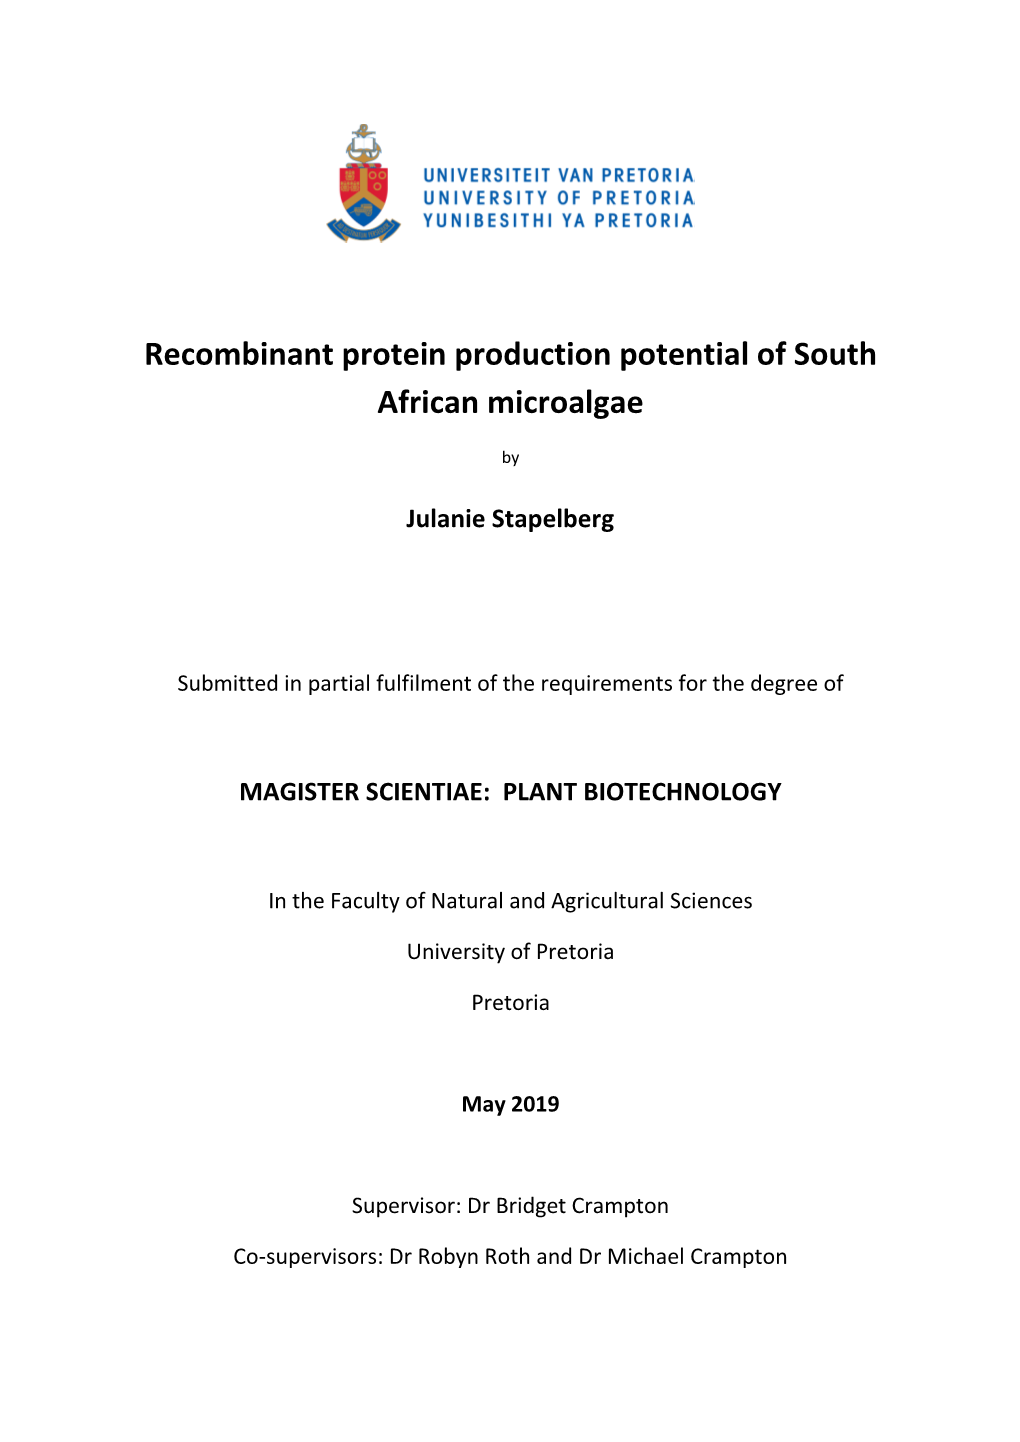 Recombinant Protein Production Potential of South African Microalgae